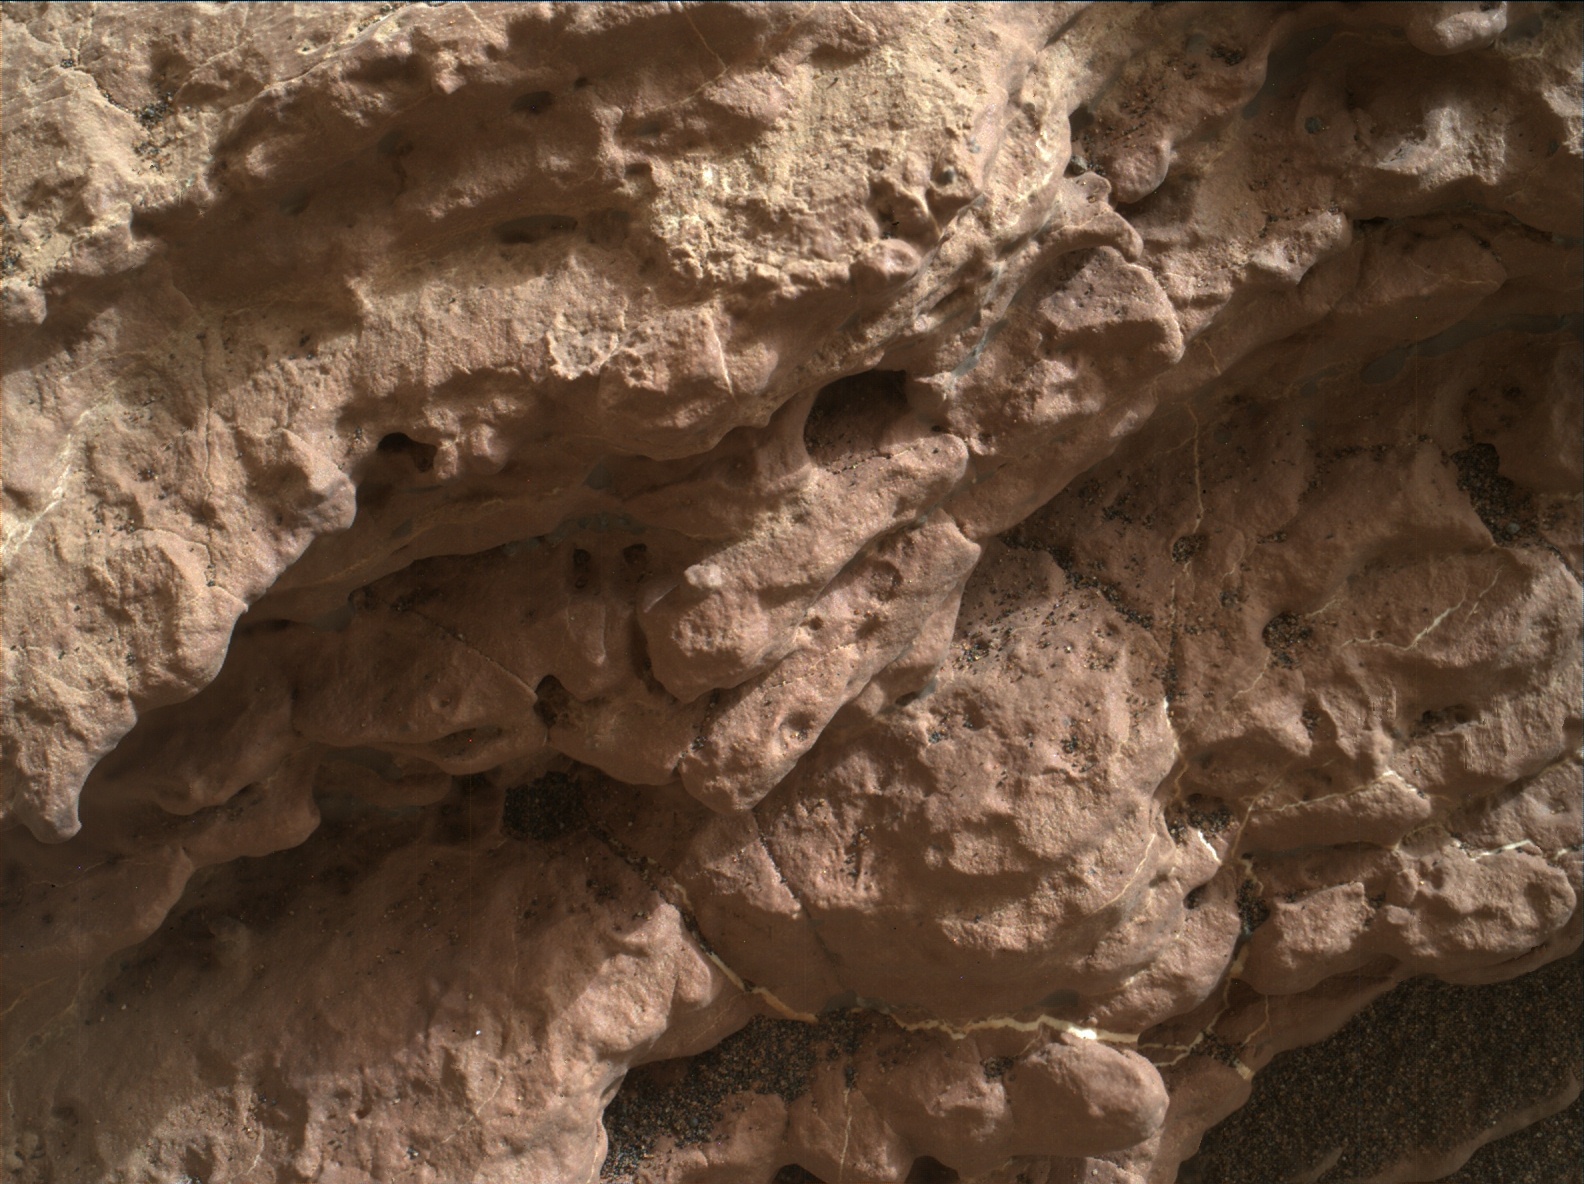 Nasa's Mars rover Curiosity acquired this image using its Mars Hand Lens Imager (MAHLI) on Sol 1594